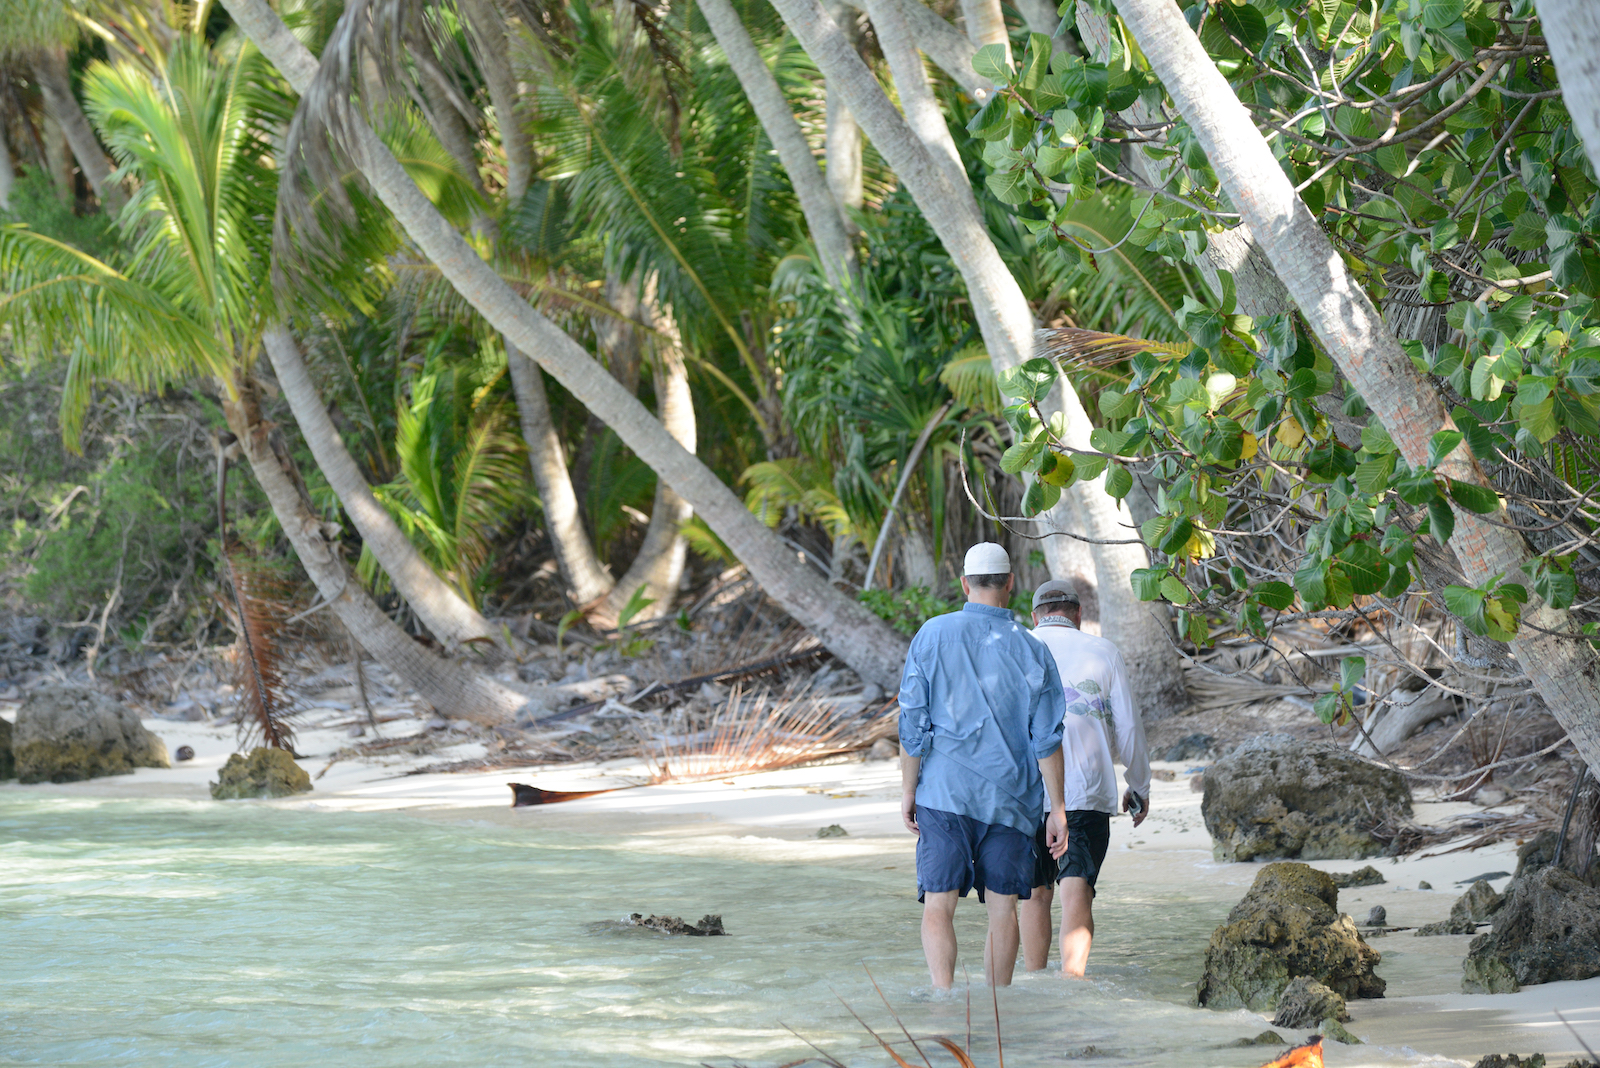 Brando guests tour the atoll with Tetiaroa Society guides